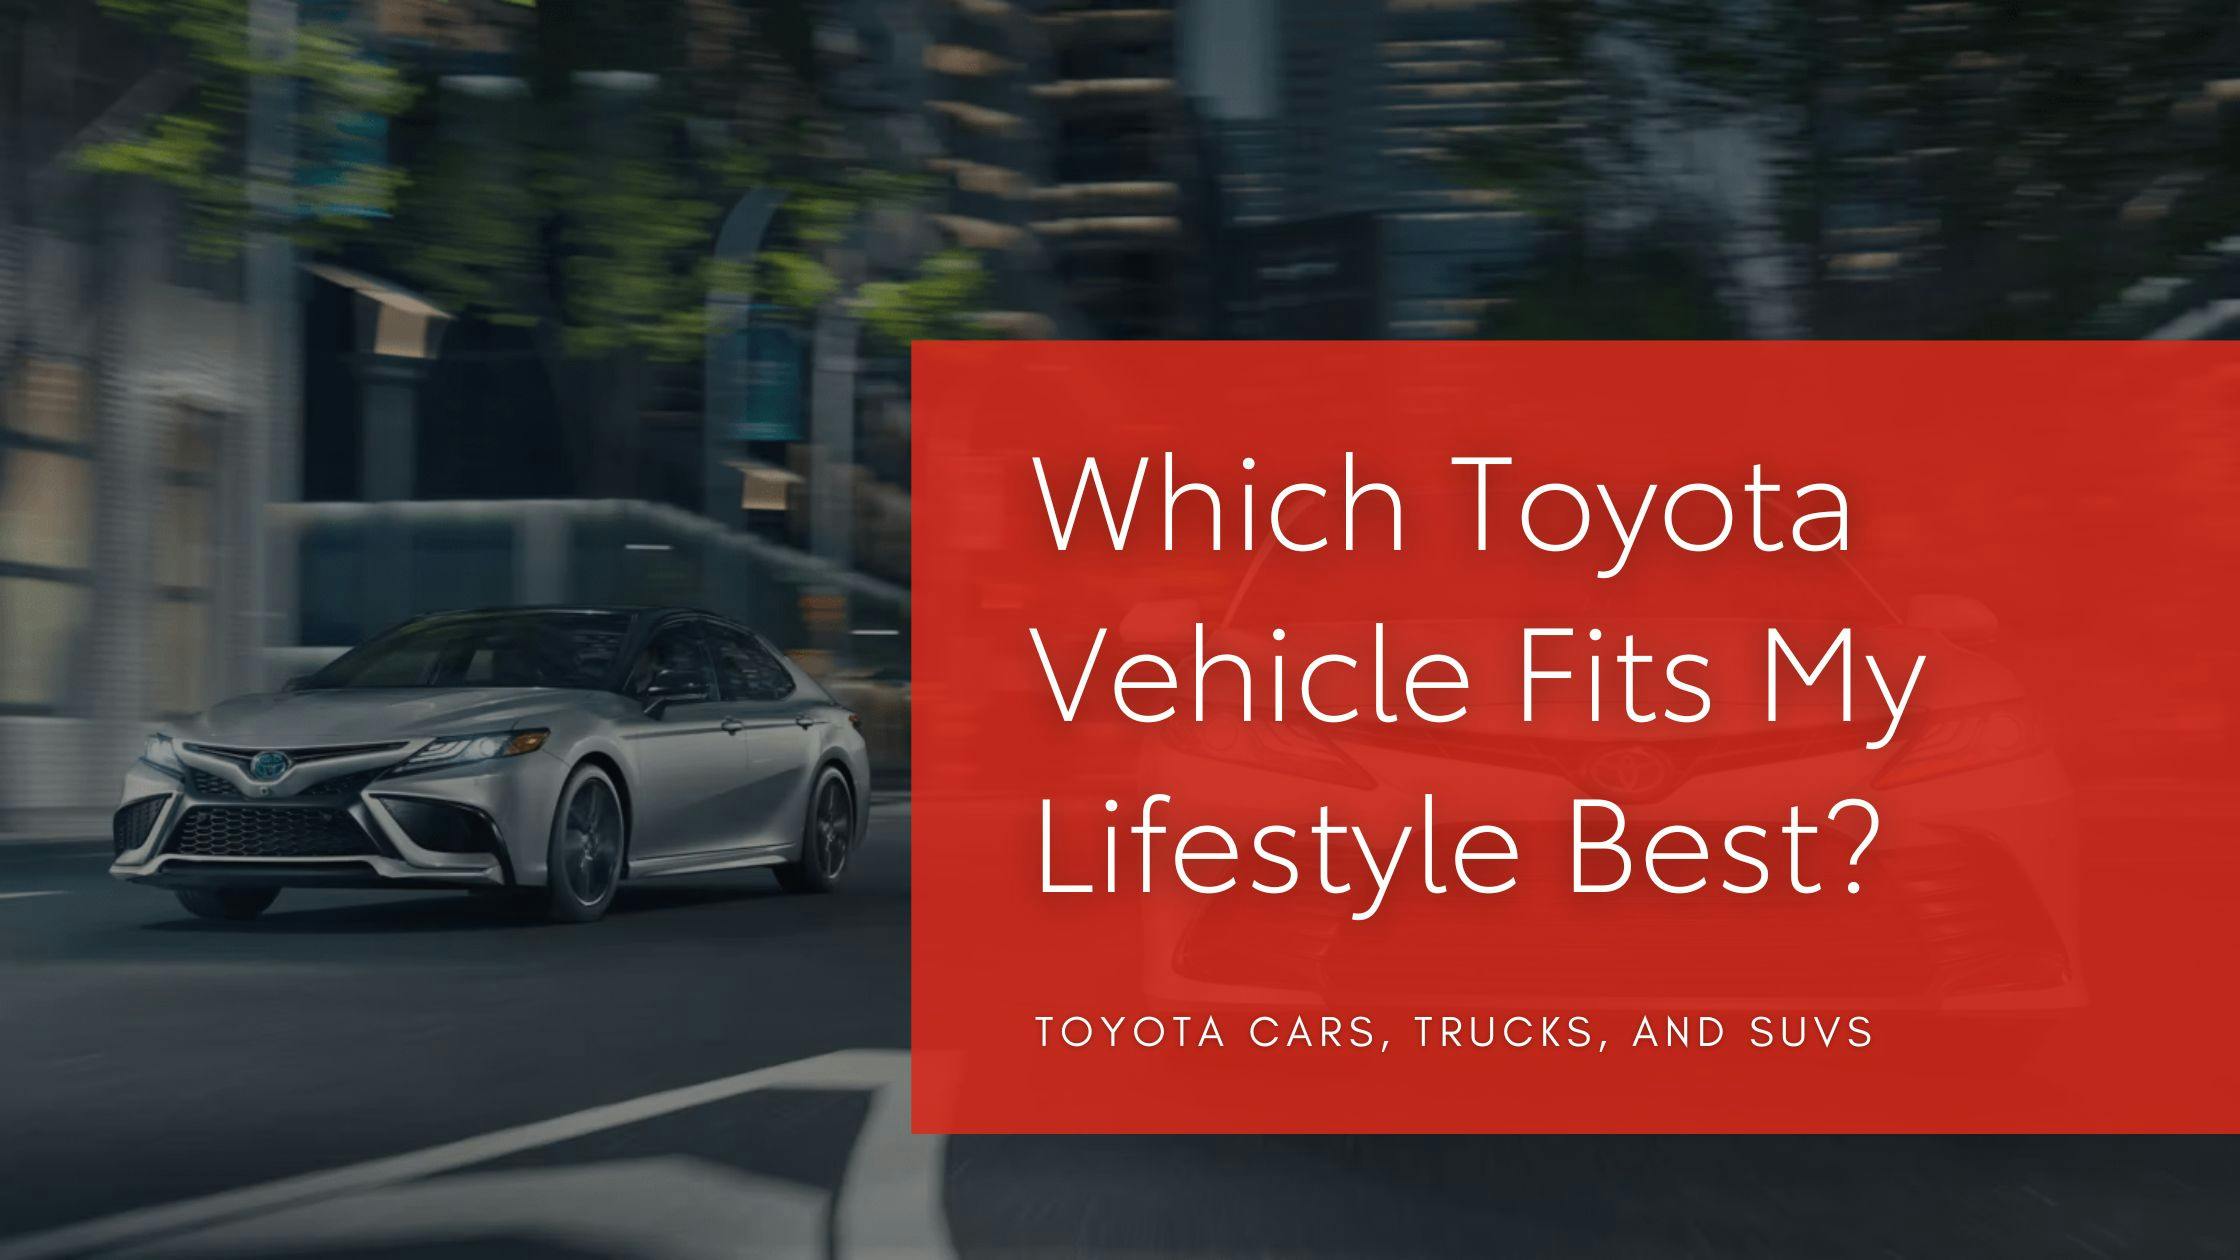 Which Toyota Vehicle Fits My Lifestyle Best